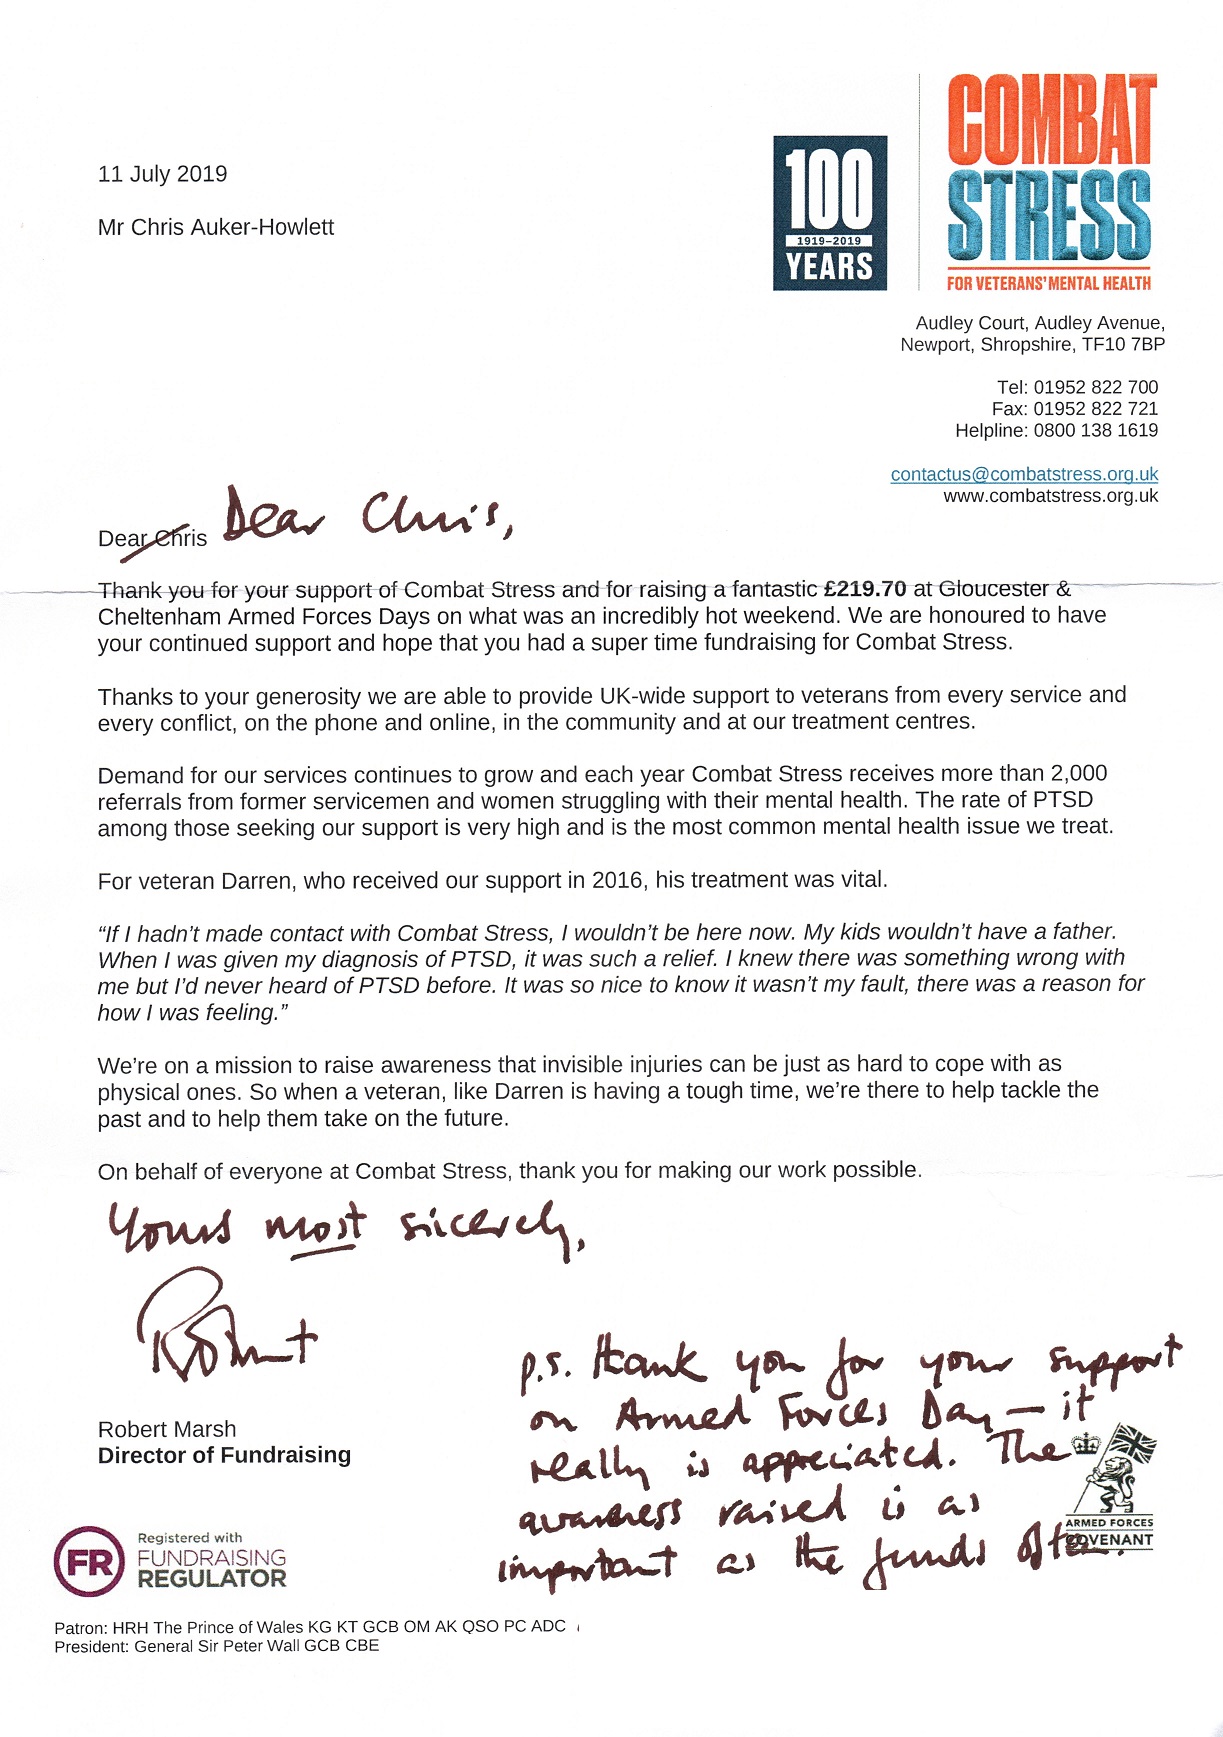 acknowledgement letter from Combat Stress for the £219.70 raised at both events